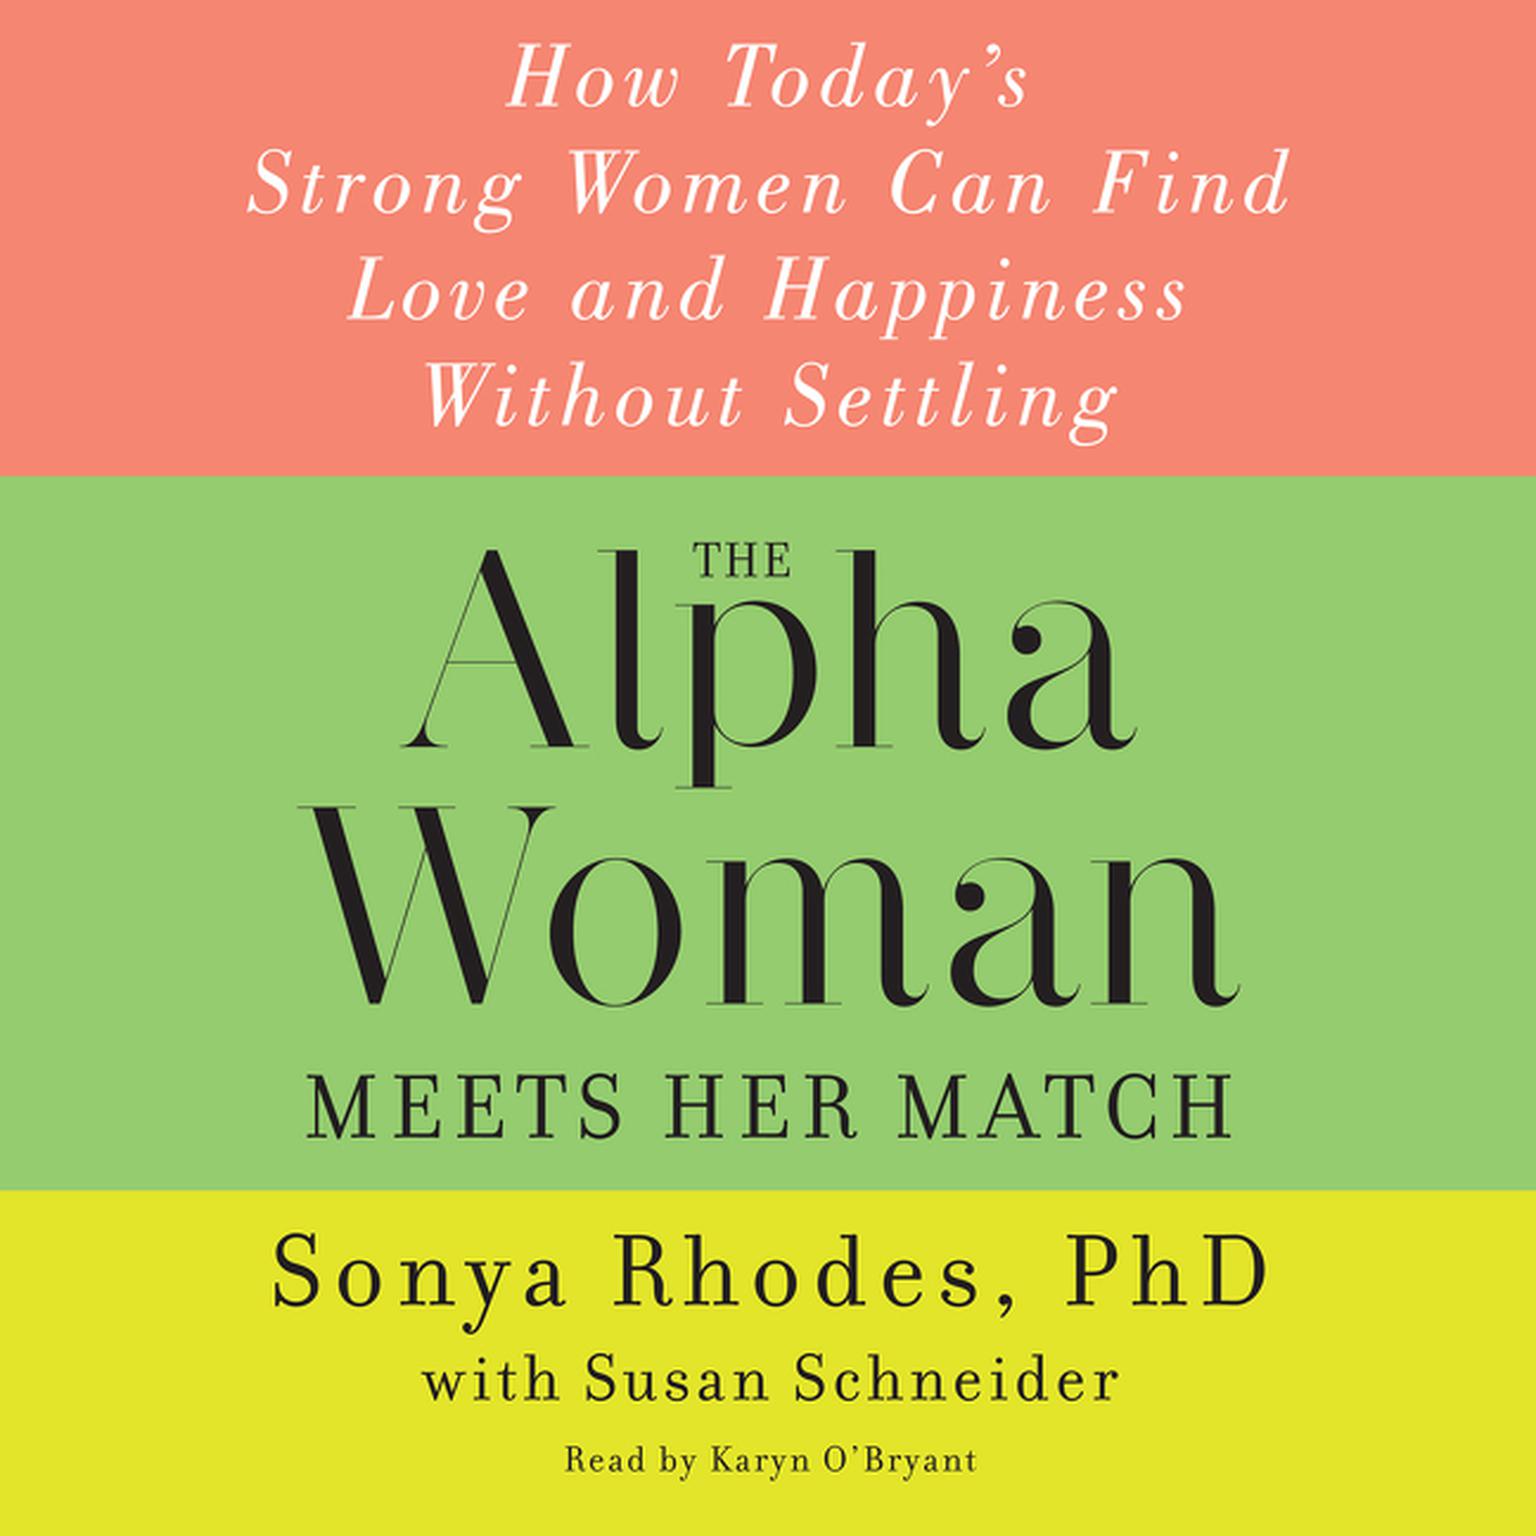 The Alpha Woman Meets Her Match: How Todays Strong Women Can Find Love and Happiness Without Settling Audiobook, by Sonya Rhodes